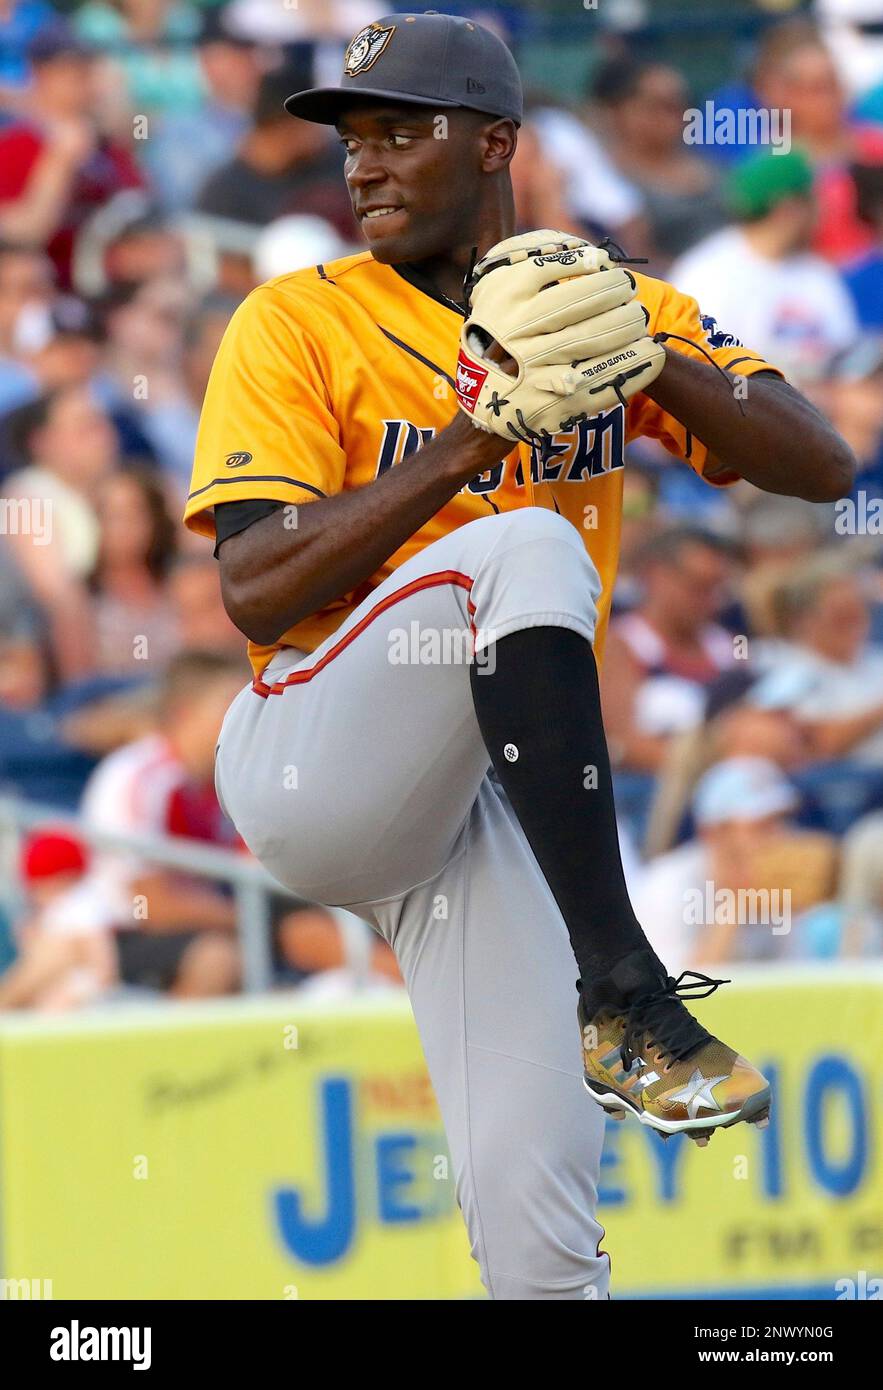 July 11, 2018 - Trenton, New Jersey, U.S - KEN GRIFFEY SR. was one of the  celebrities who threw out a first pitch before the Eastern League All-Star  Game hosted by the